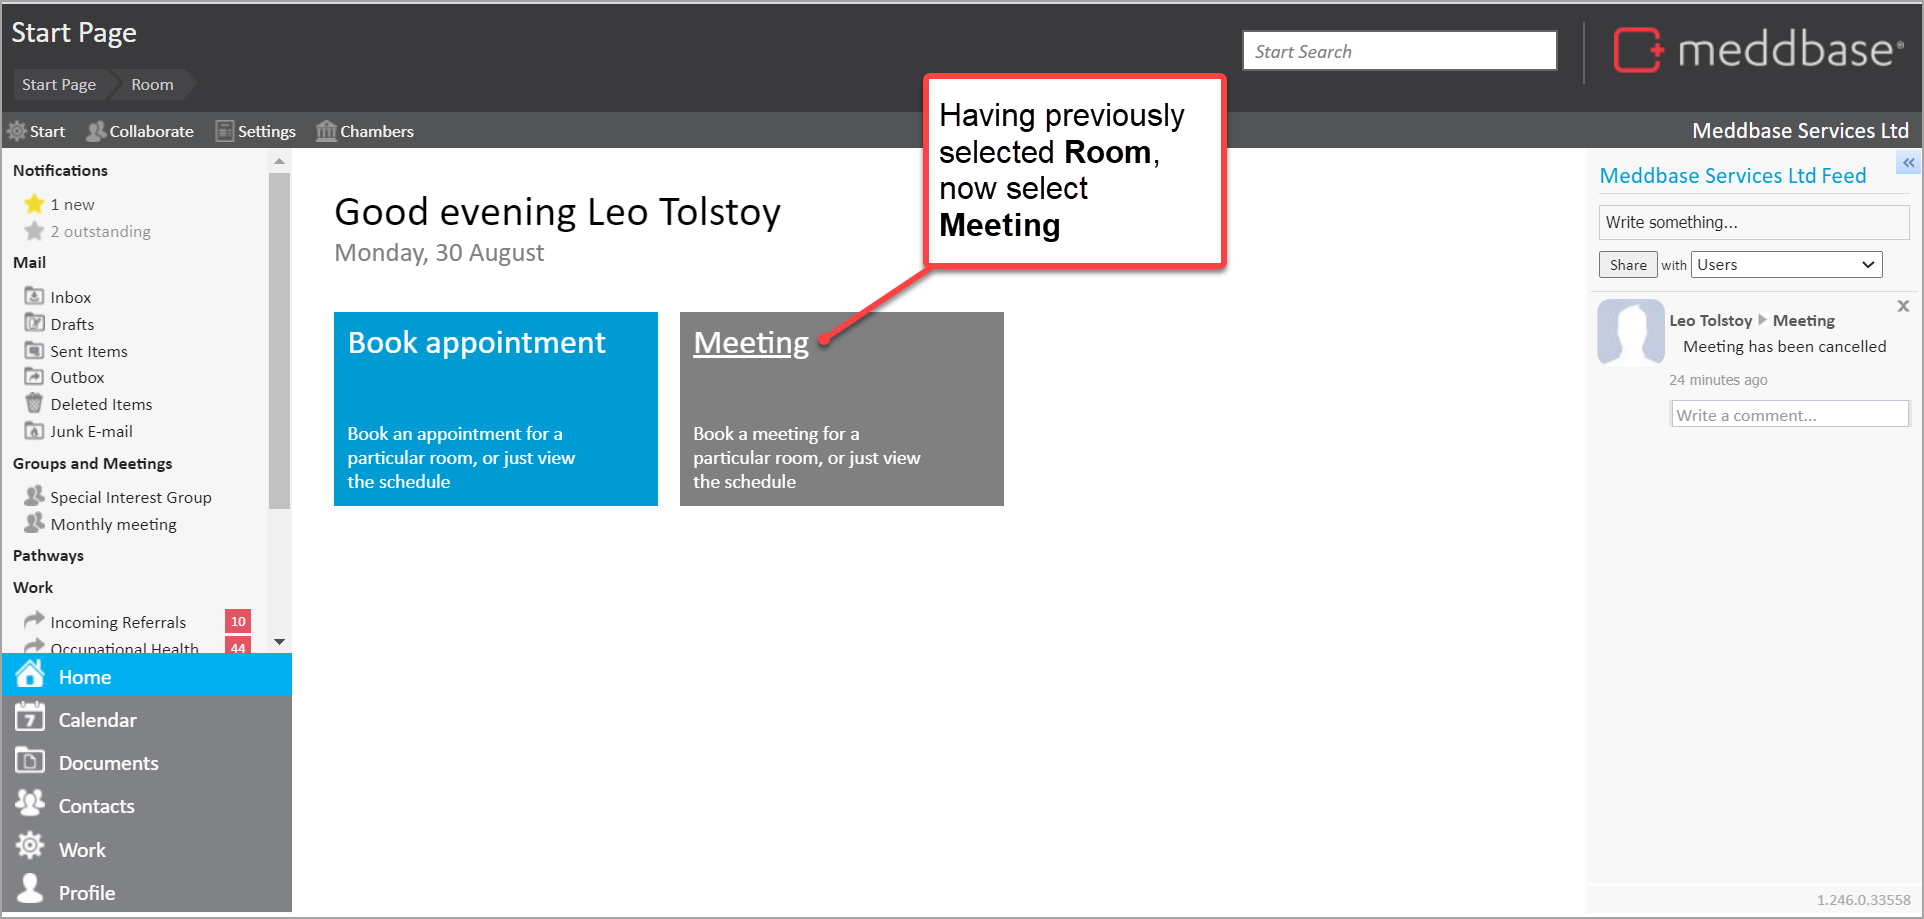 Room section in Meddbase application with annotation for selection of meeting tile to book a meeting